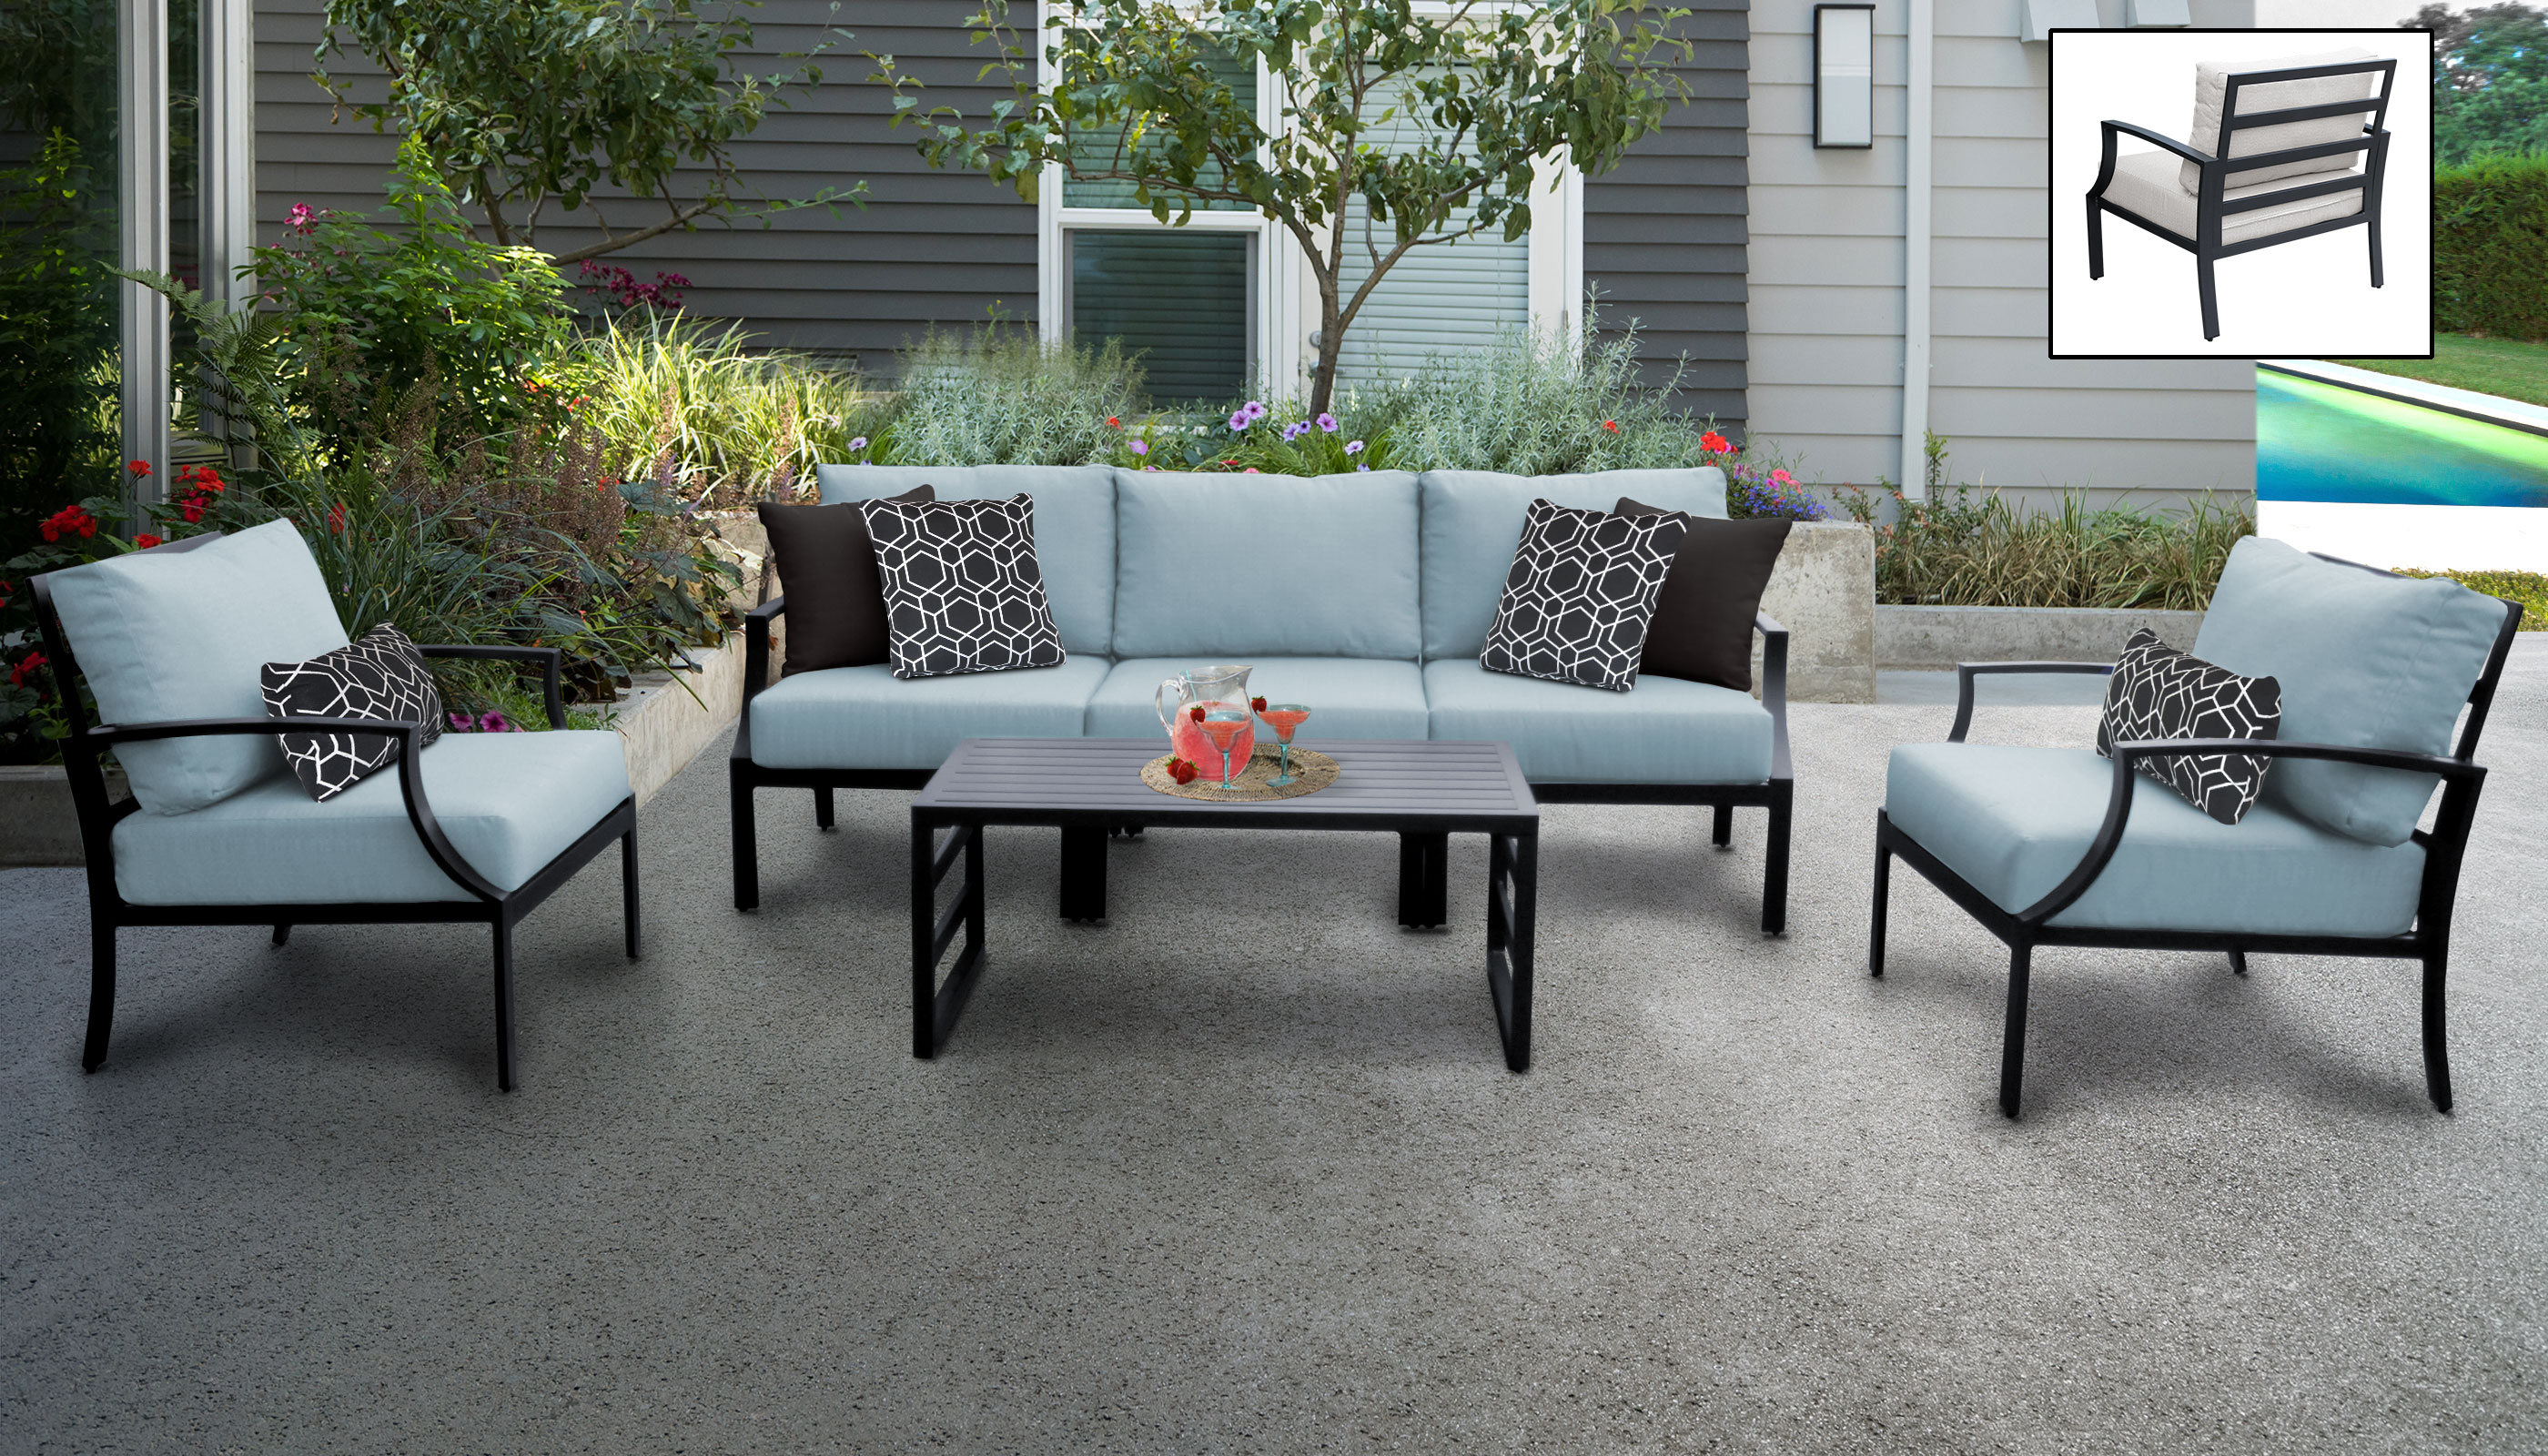 6 Piece Patio Furniture : Some patio dining sets can be shipped to you ...